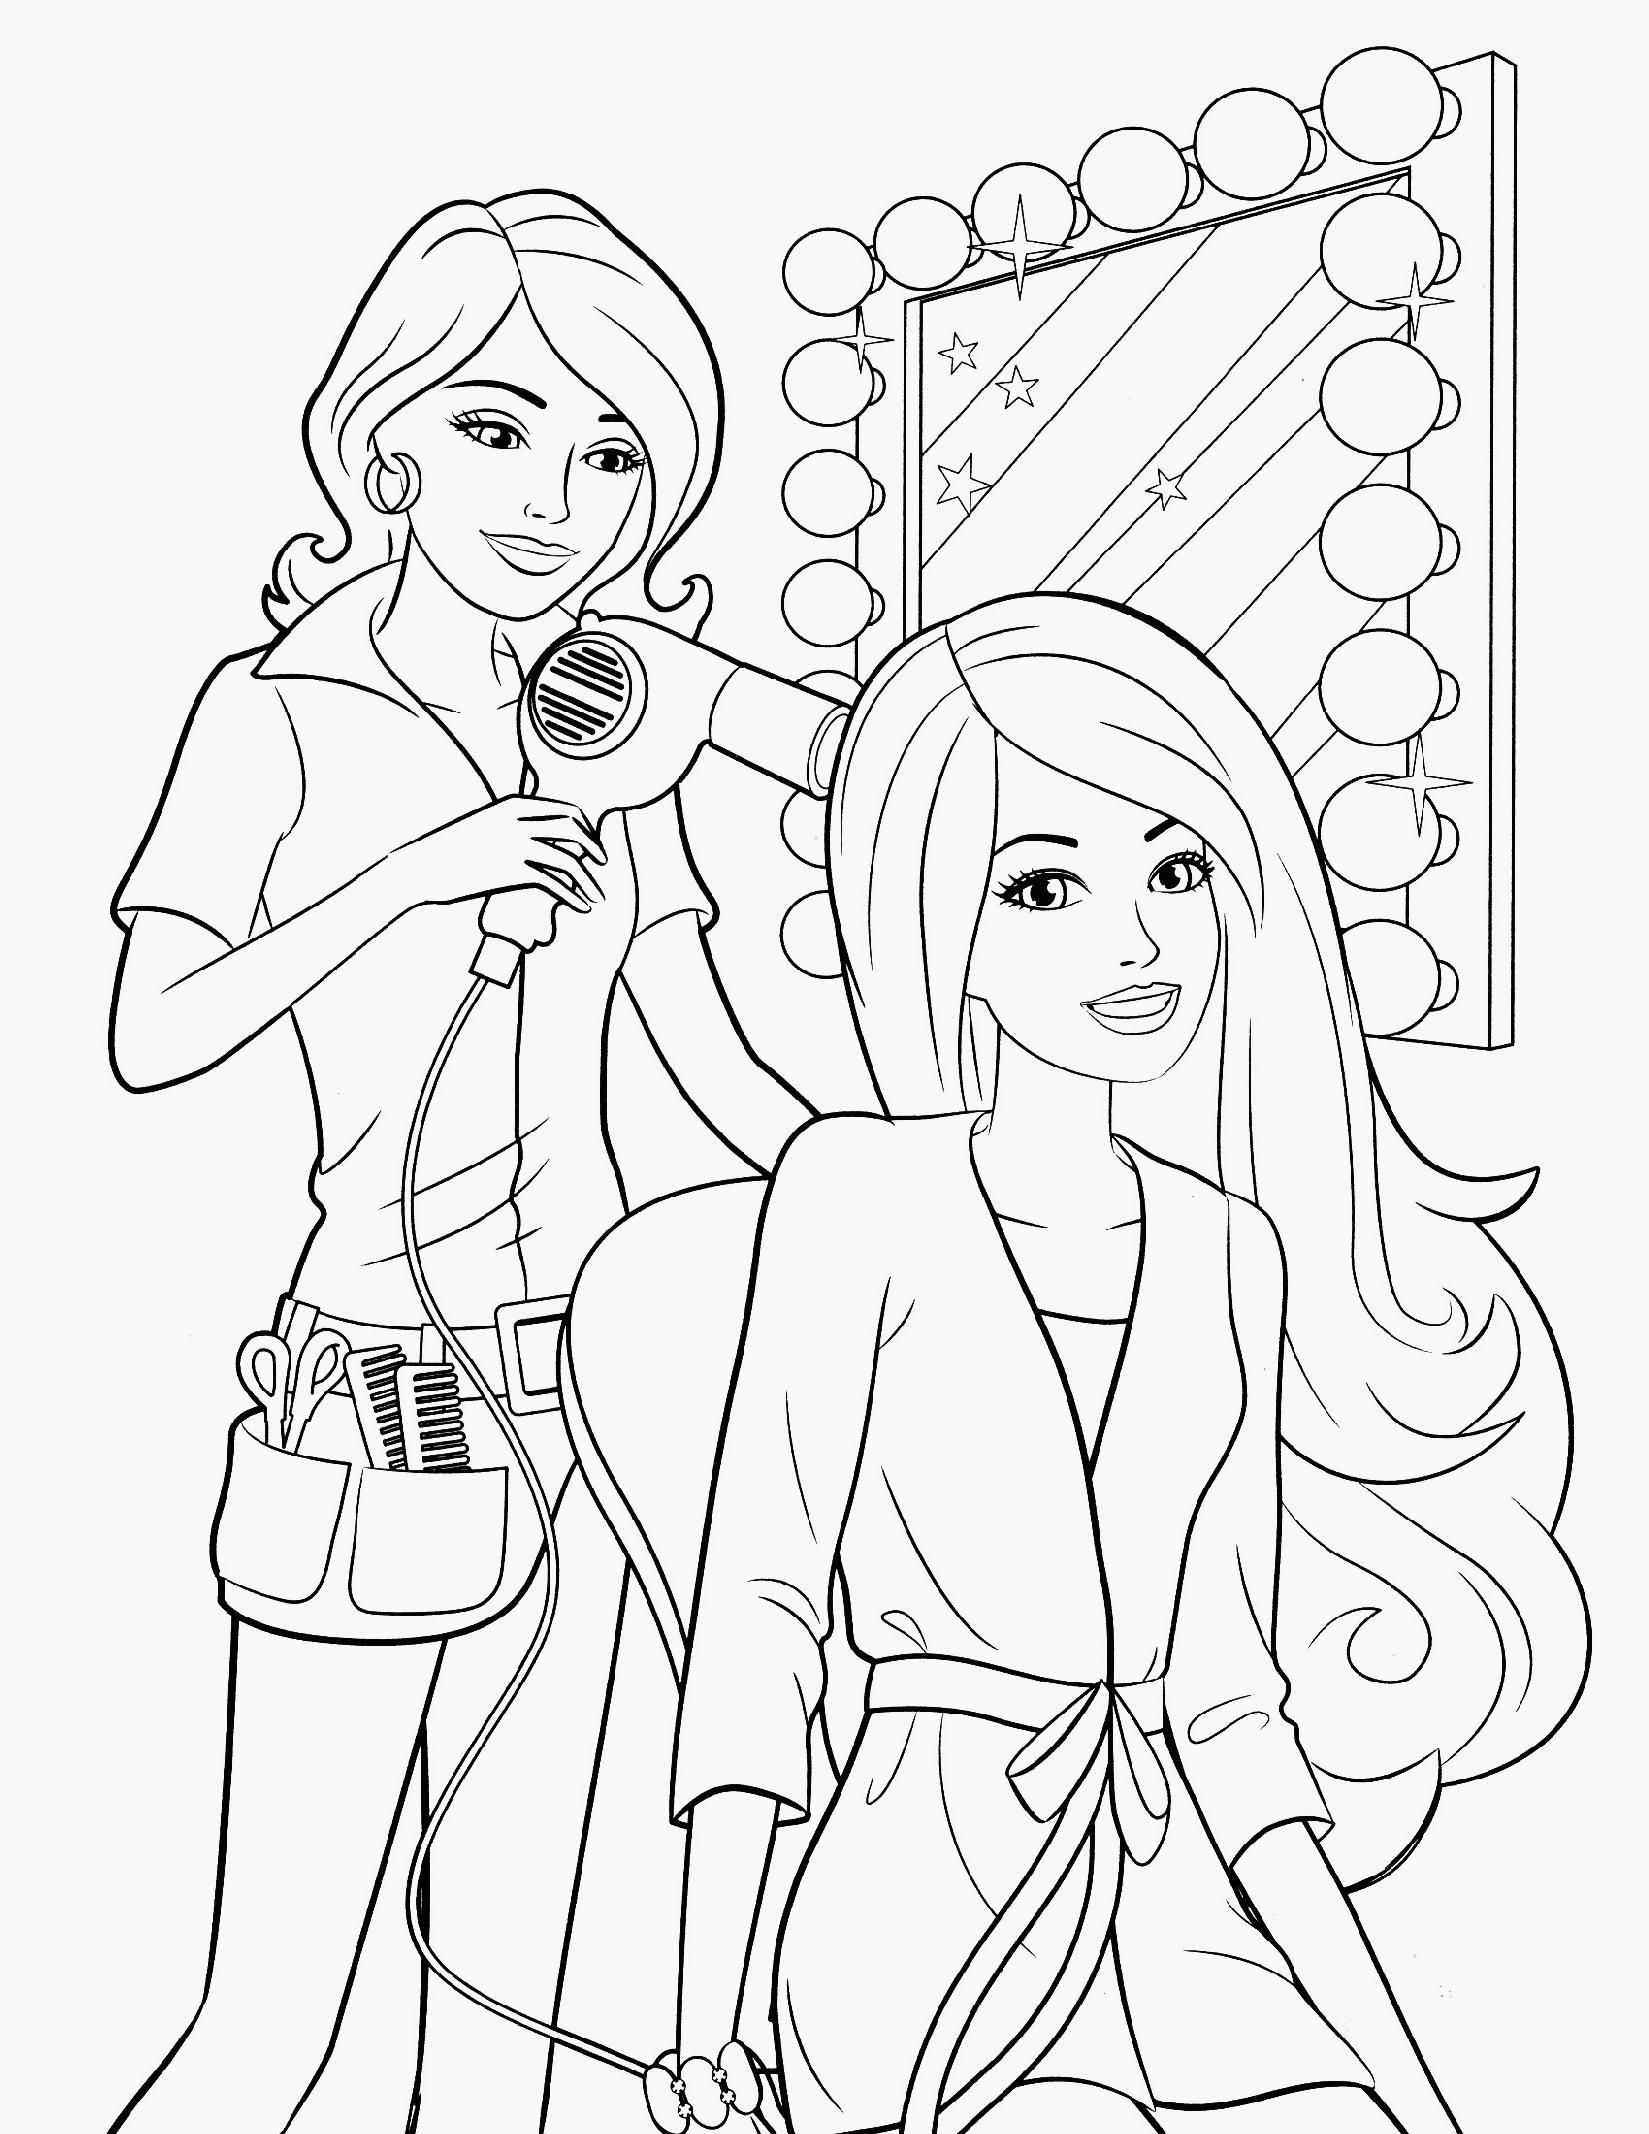 Articles On Clothing Coloring Pages - Coloring Pages For All Ages